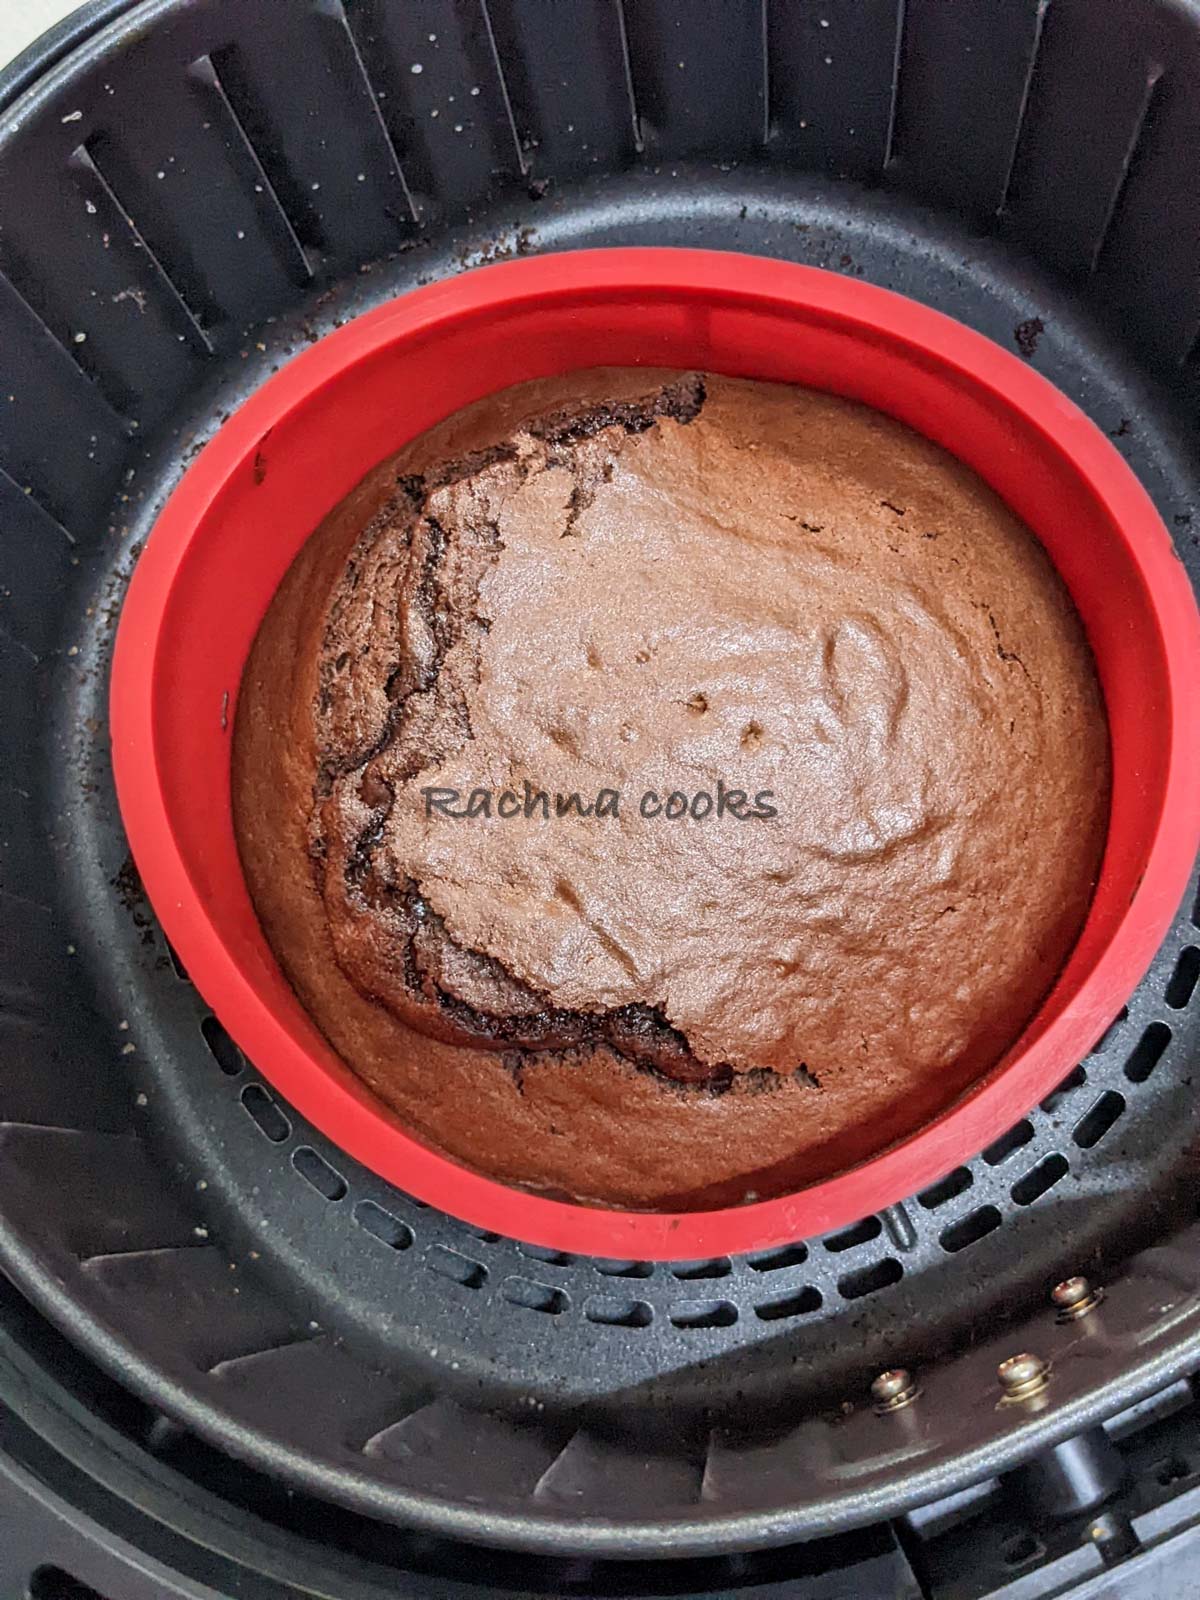 Chocolate cake in a red mould in air fryer basket.